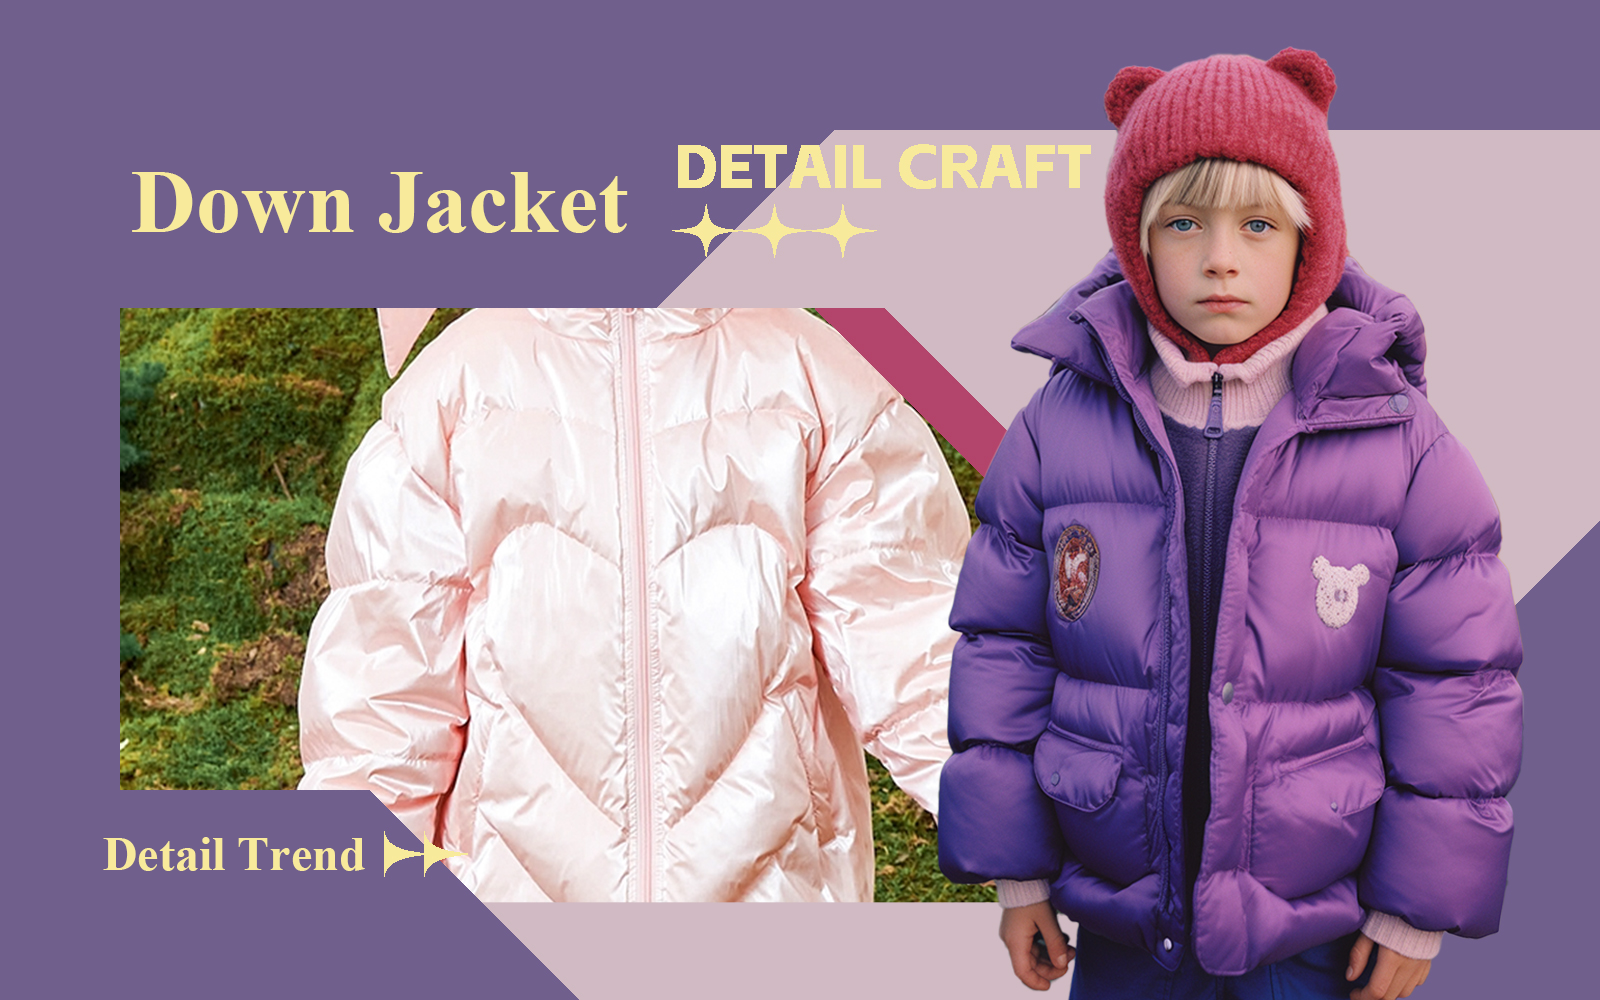 The Detail & Craft Trend for Kids' Down Jacket